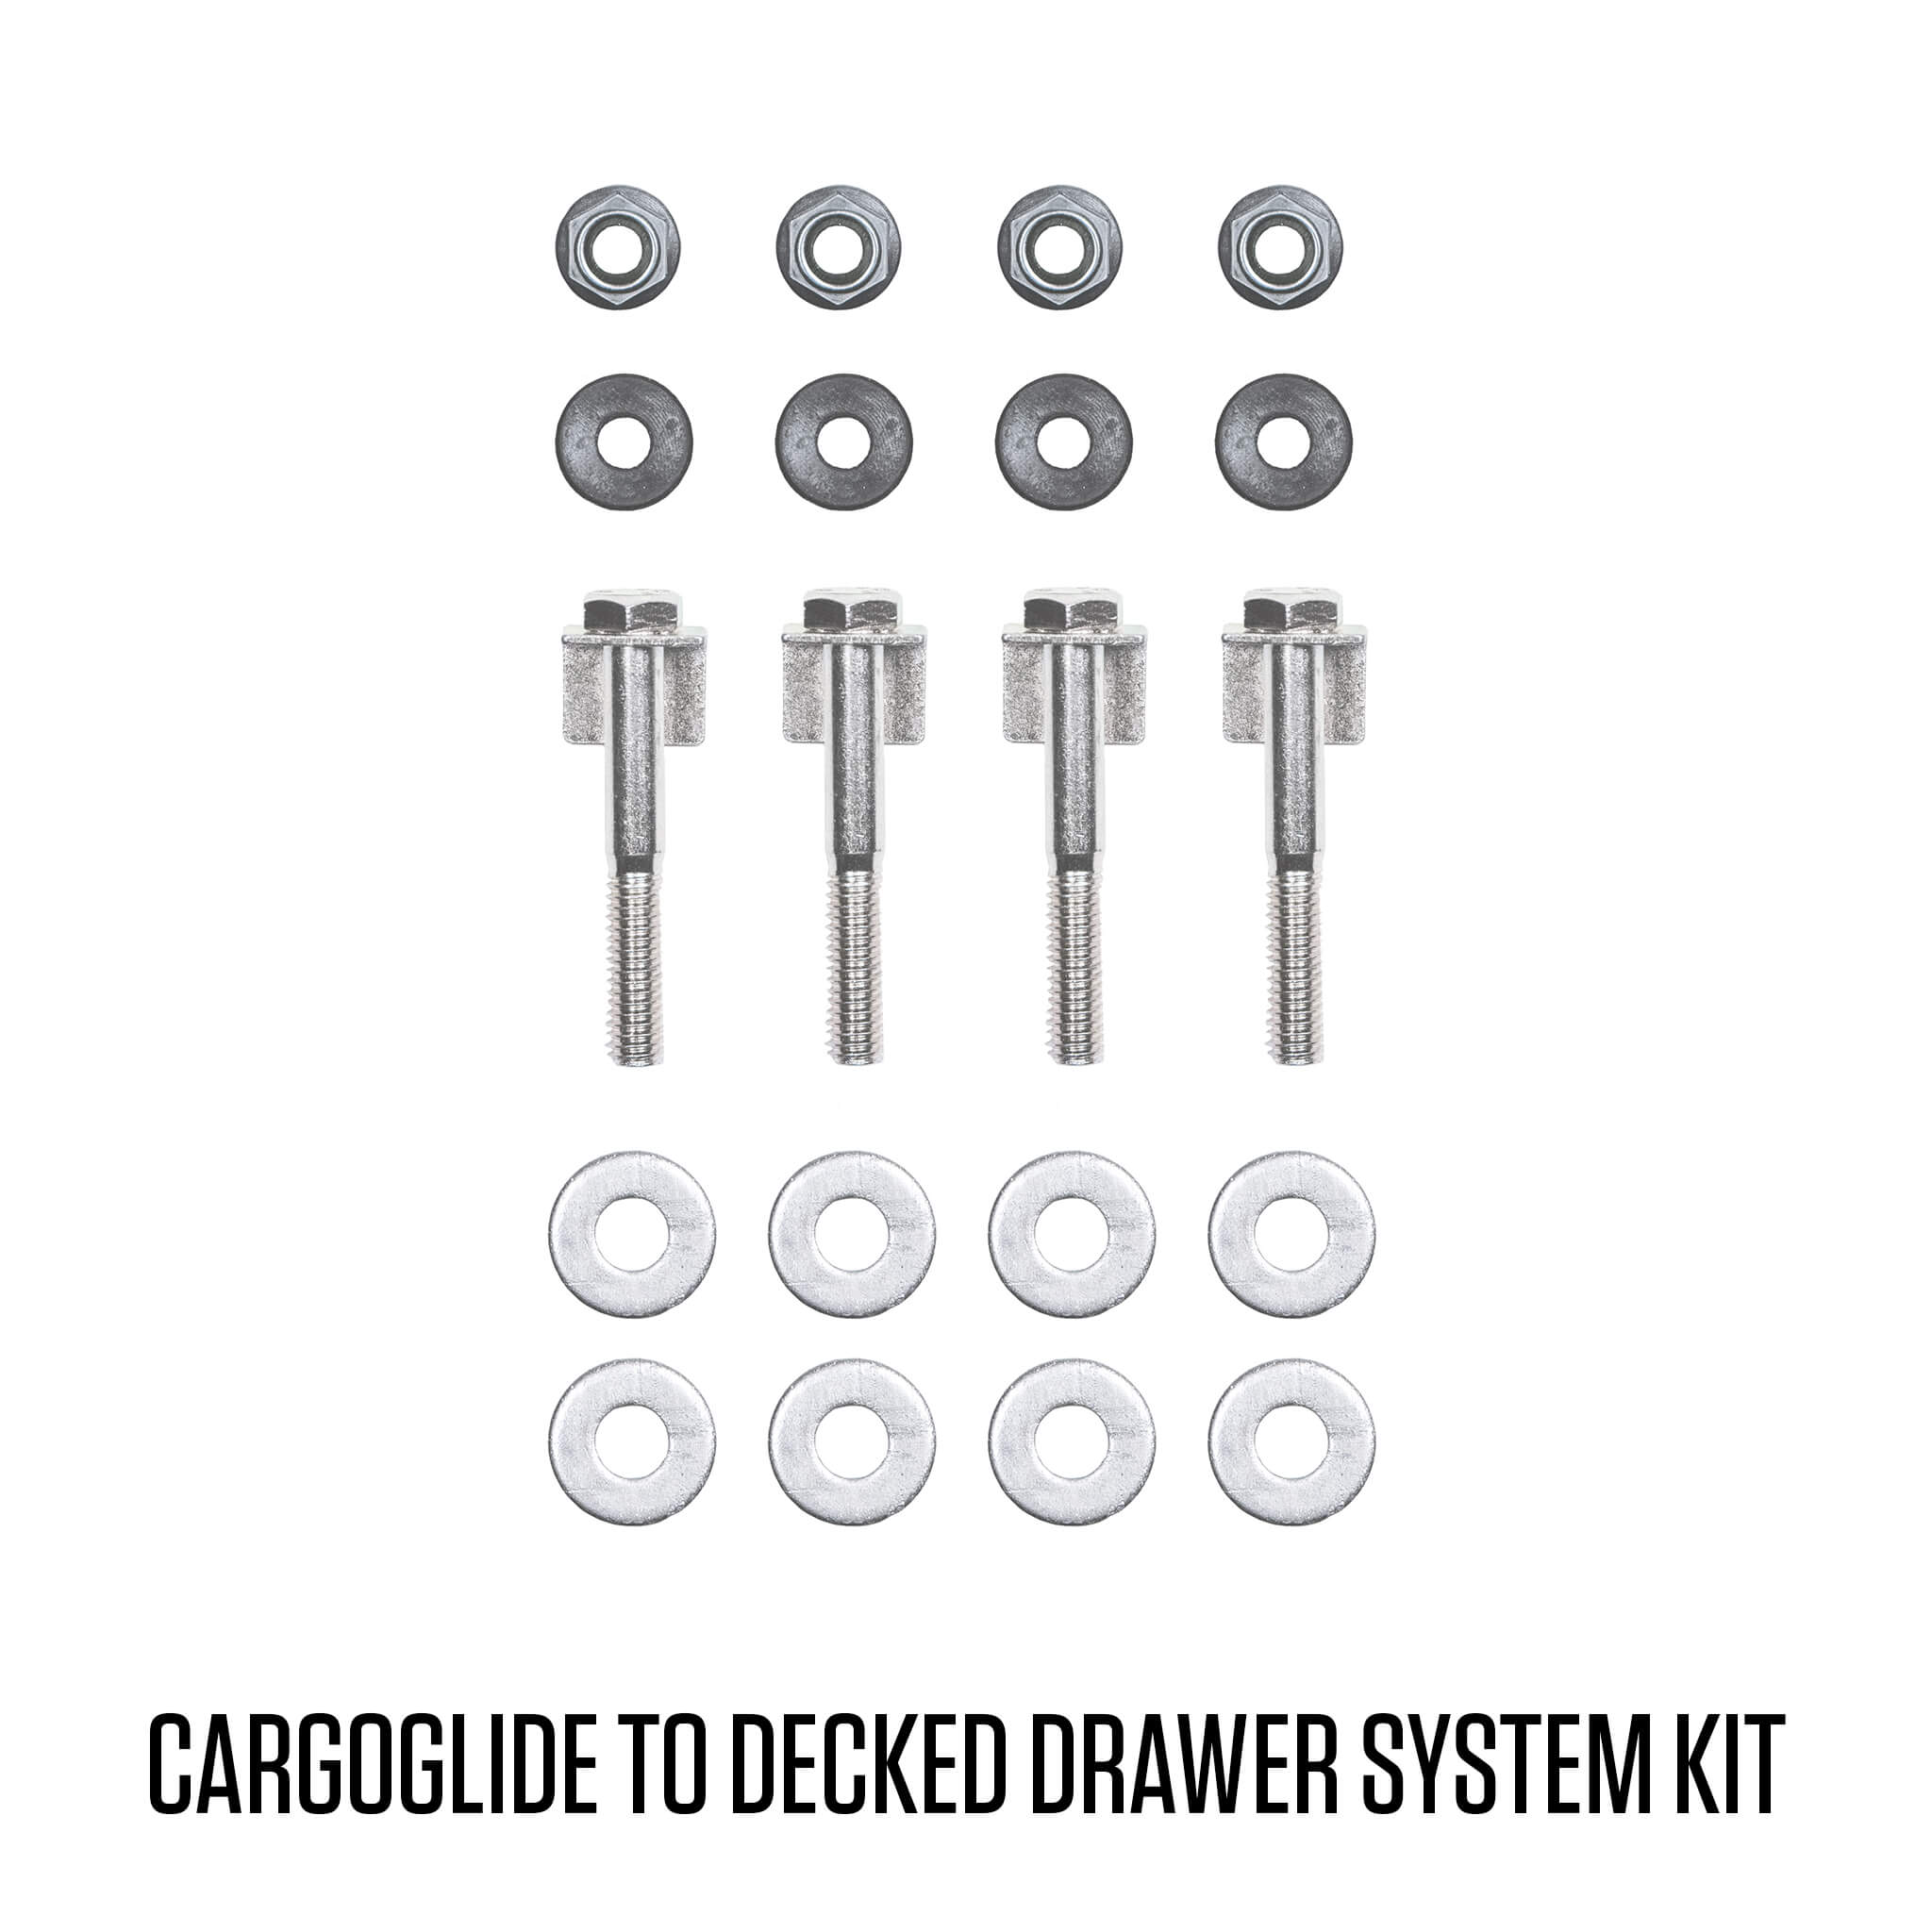 Studio image of a CargoGlide installation to Drawer System kit